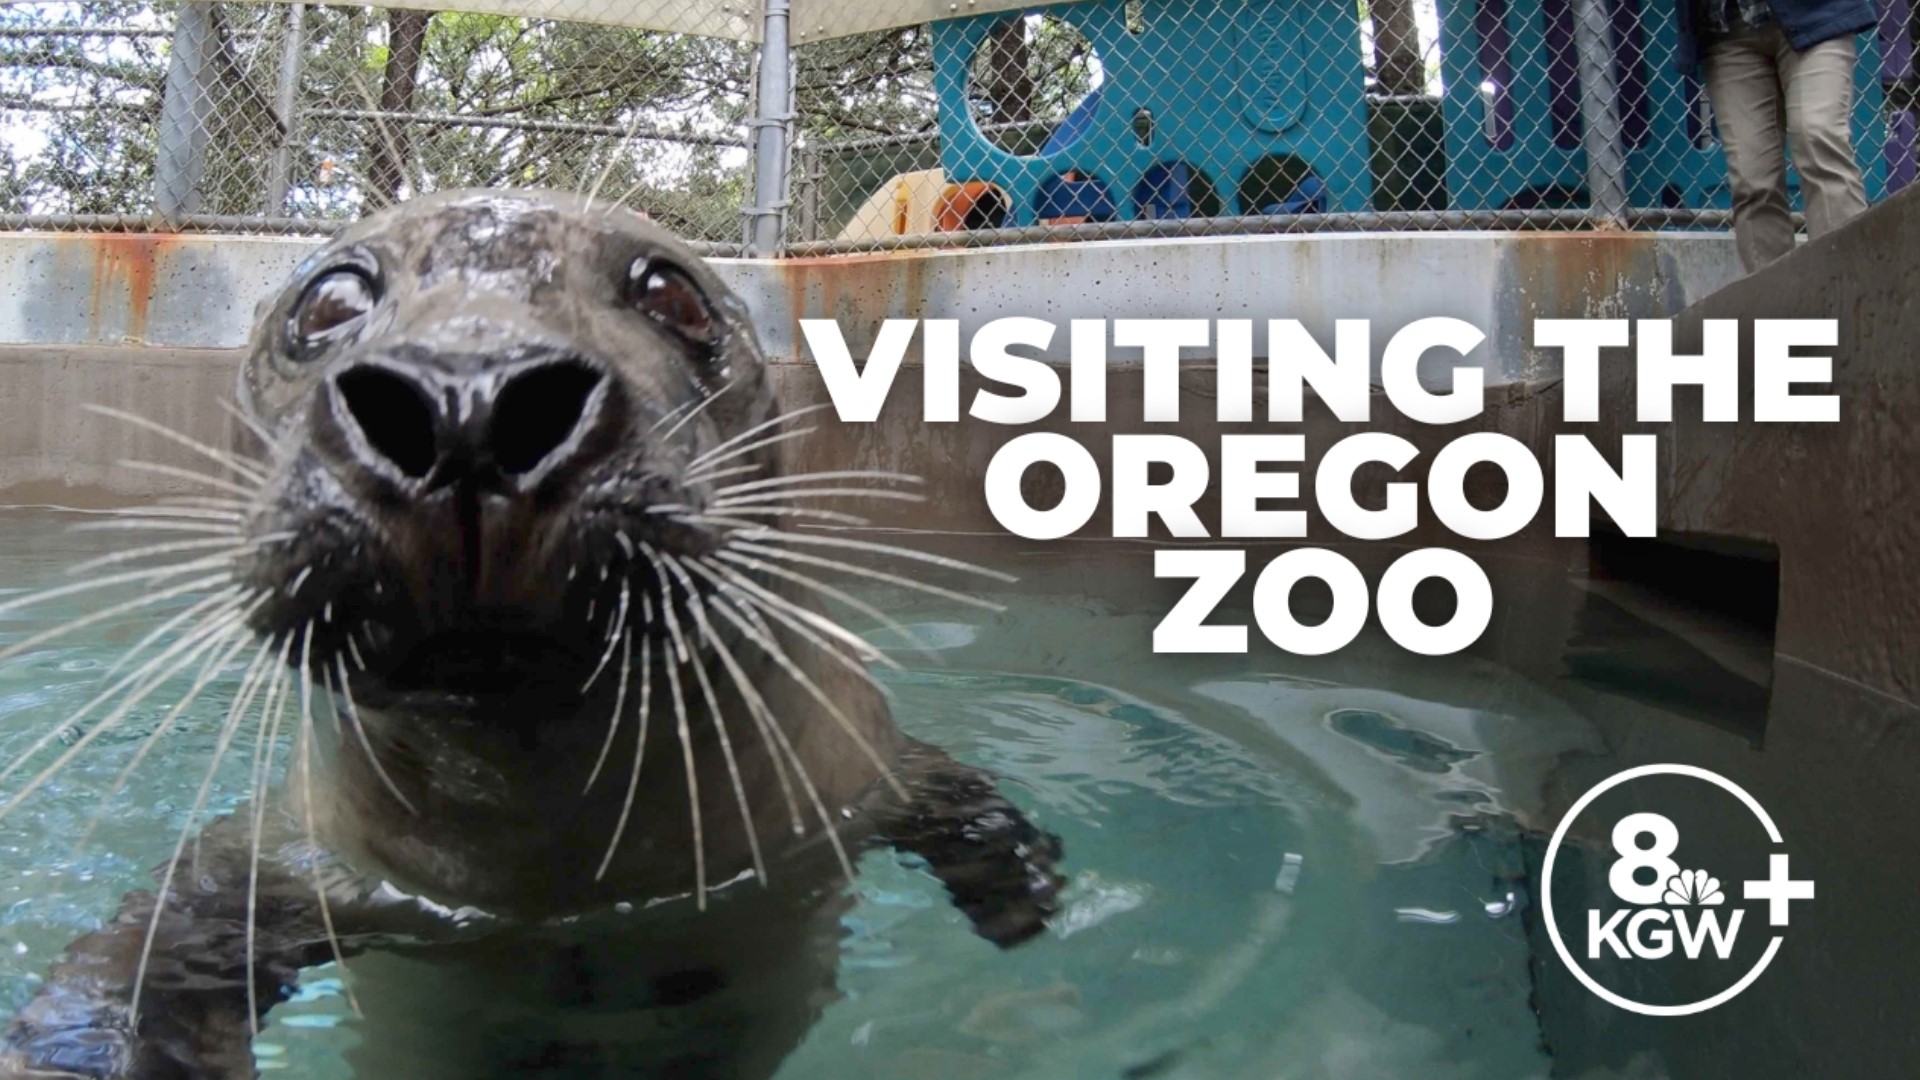 Drew Carney helps train the harbor seals, learns about the effort to save the endangered tiny pond turtles, visits the red-tailed monkeys and meets King, the rhino.